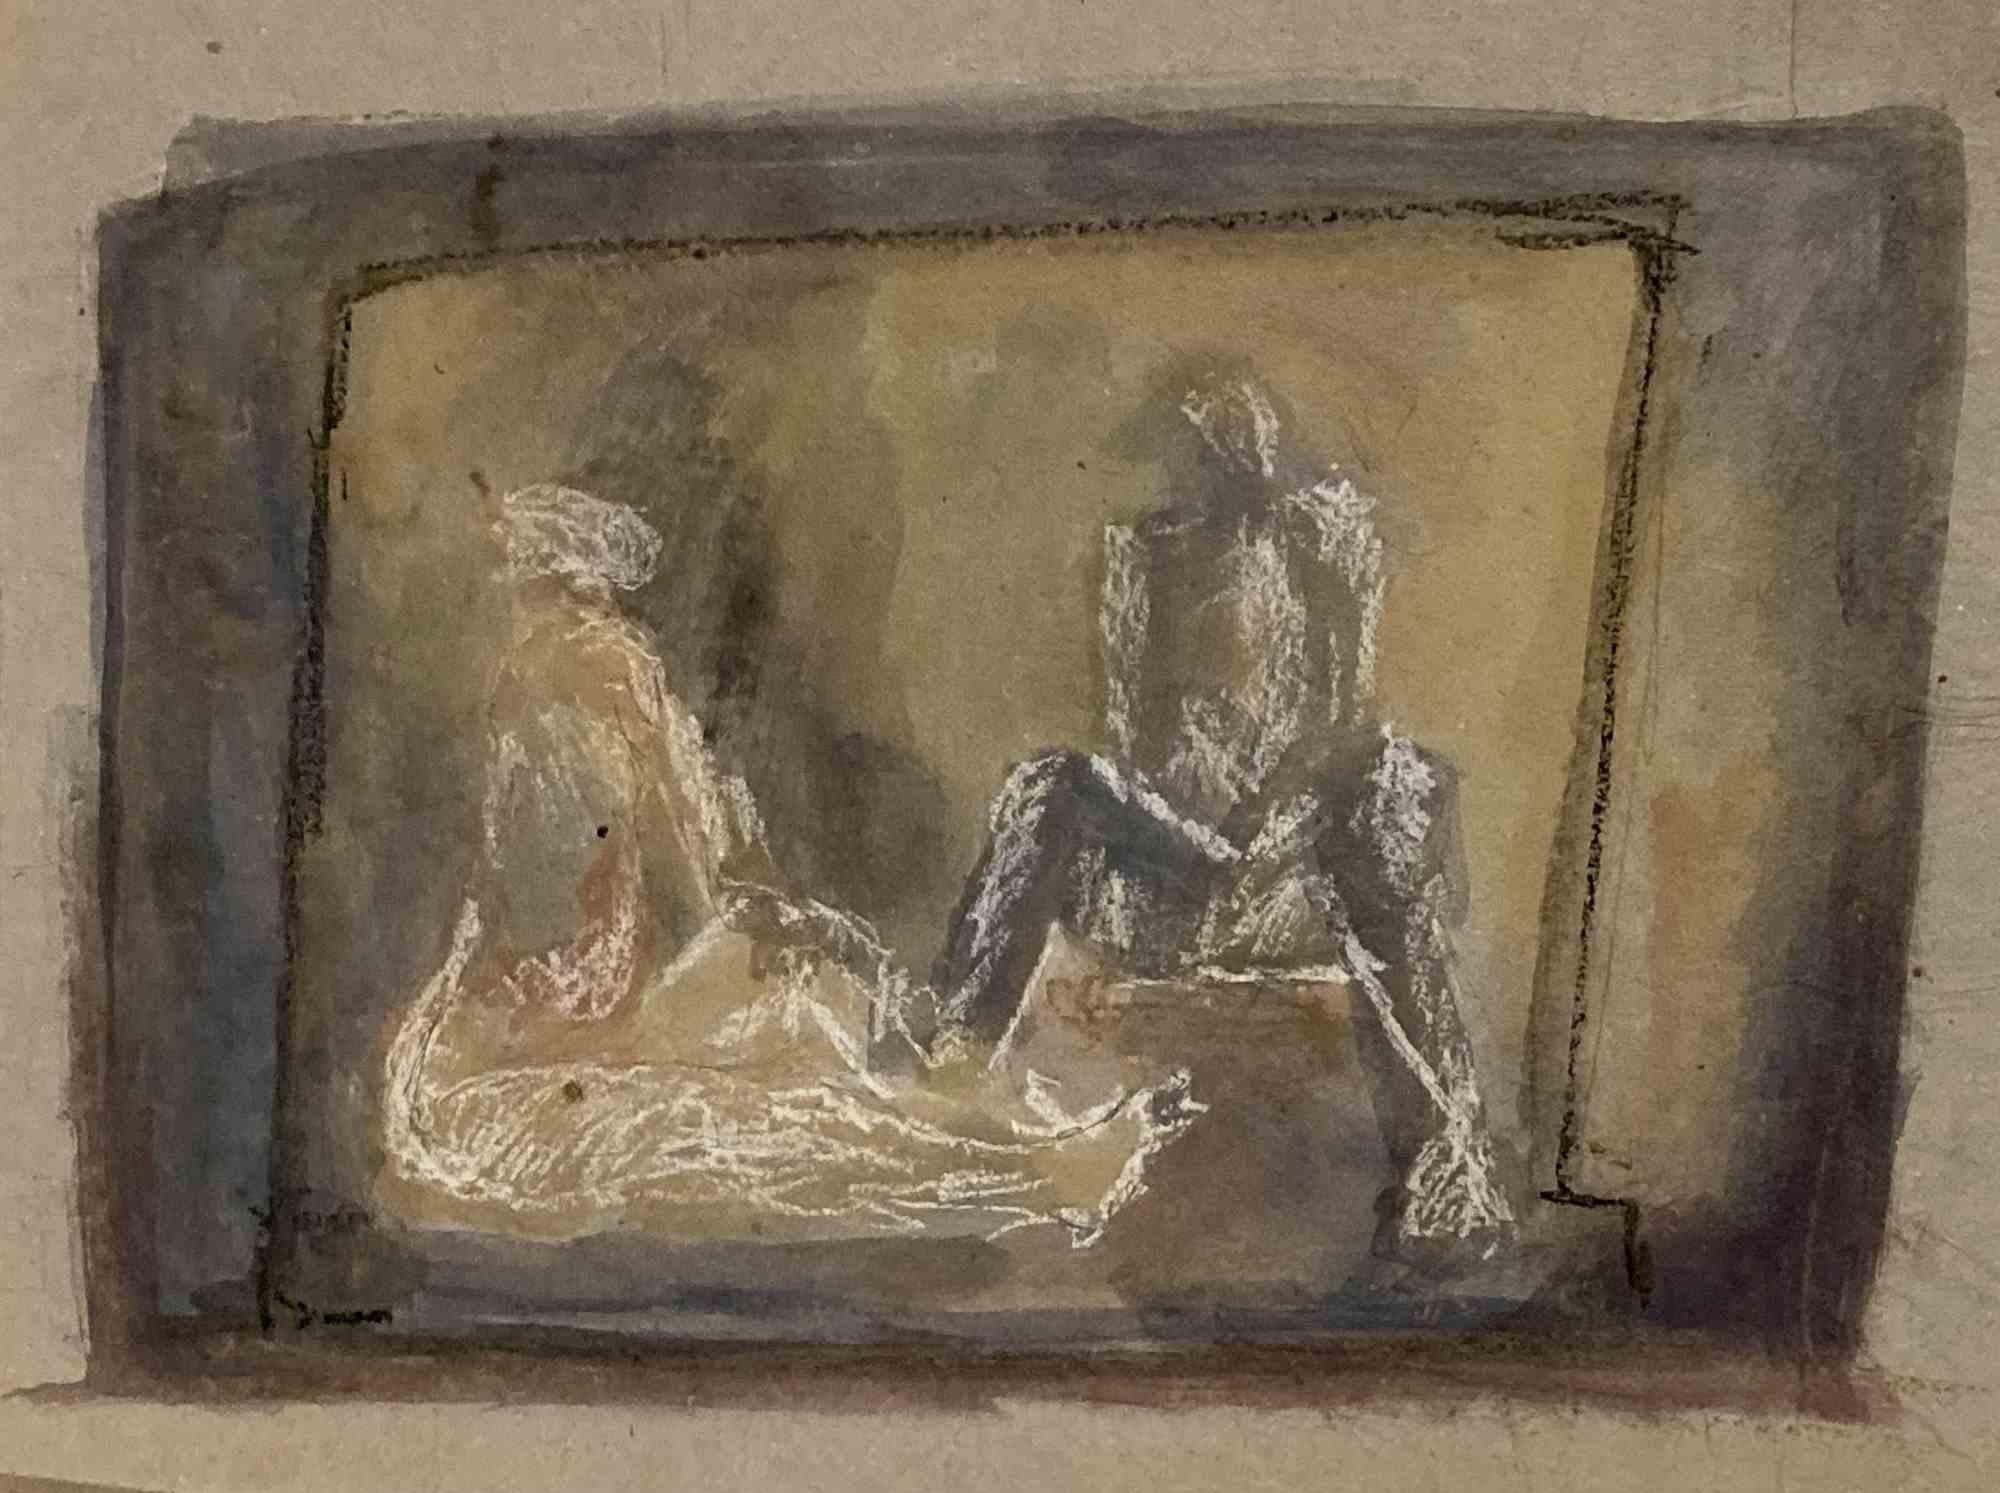 Mixed media realized by David Euler in 1985.

Two figures, a man and a woman drawn in white pastel on a gouache stain are depicted sitting in a cell-like structure possibly engages in some kind of a conversation. The light is “hitting” them from the